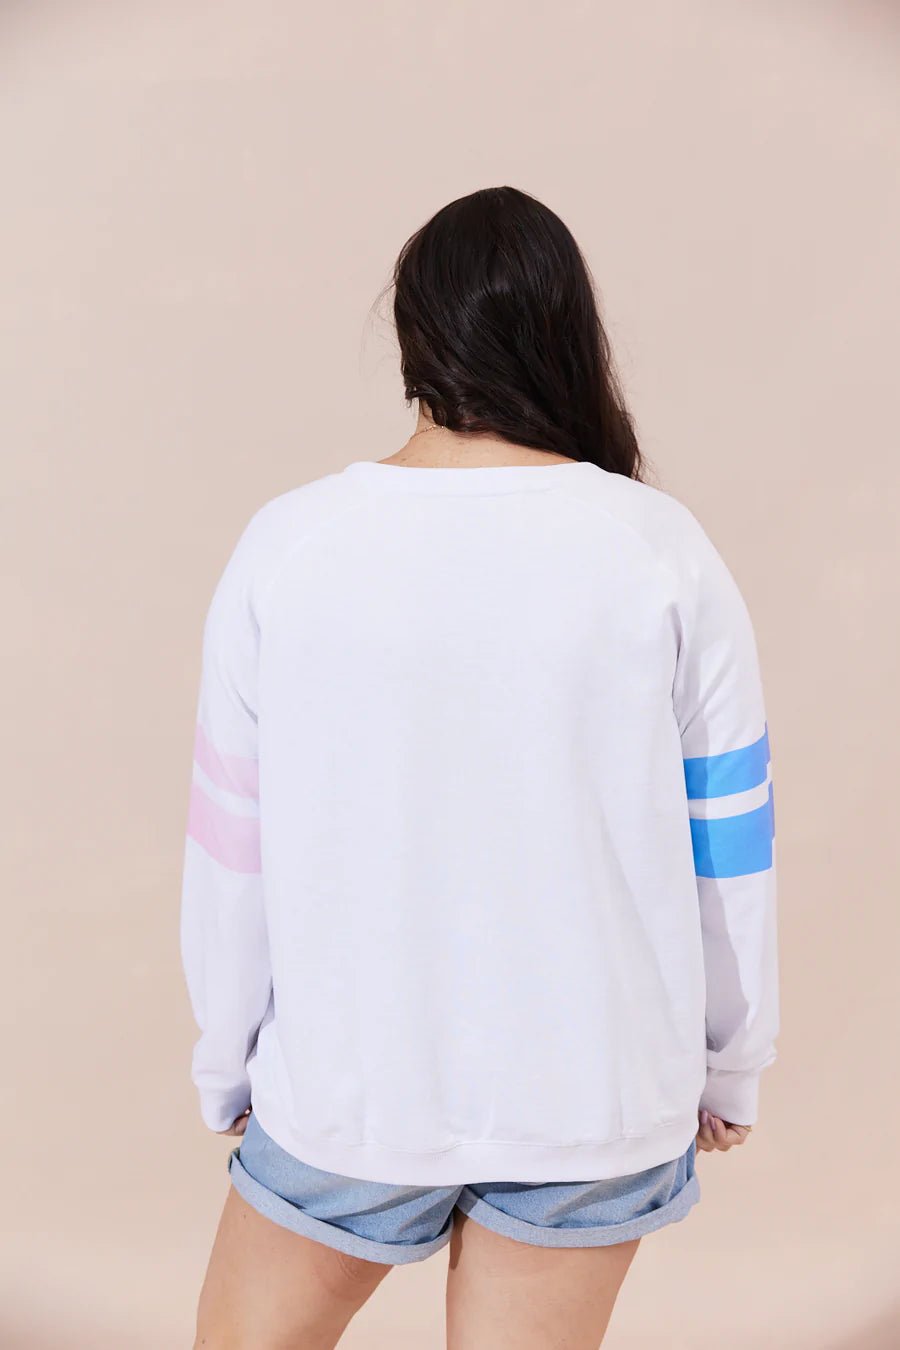 Bermuda Sweater (White Ombre) - Something For Me​​